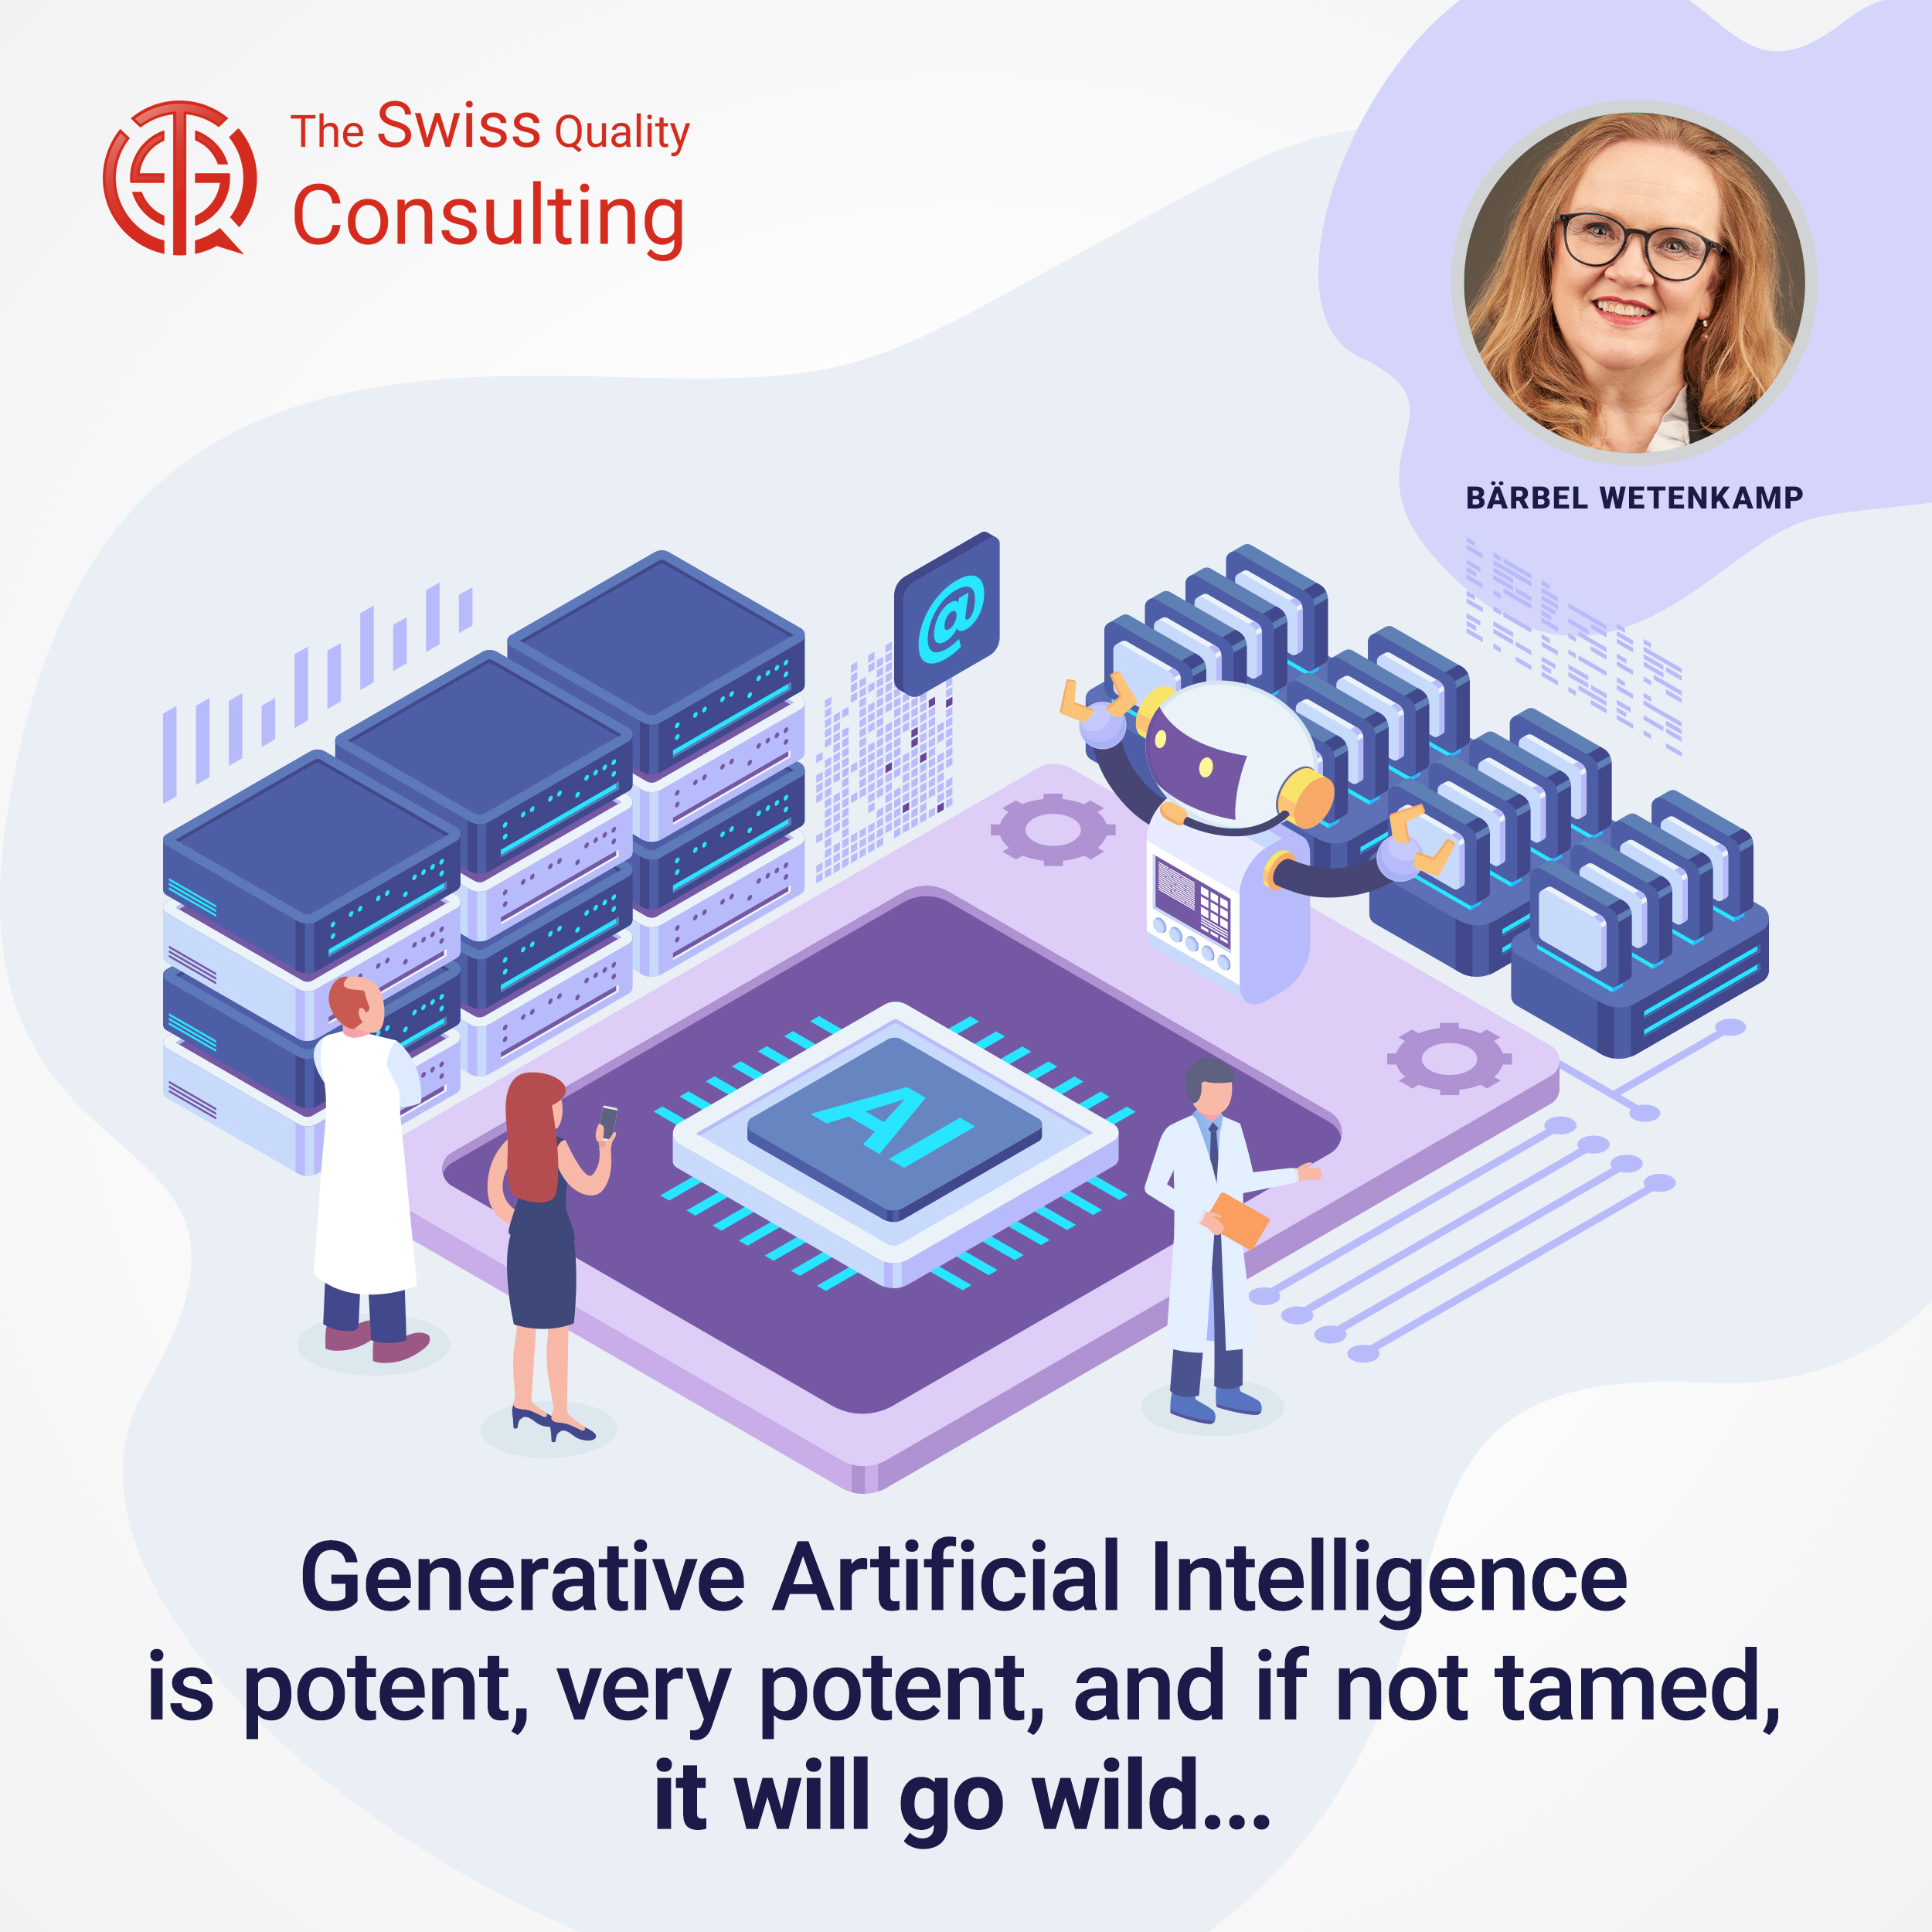 Generative Artificial Intelligence is potent, very potent, and if not tamed, it will go wild...